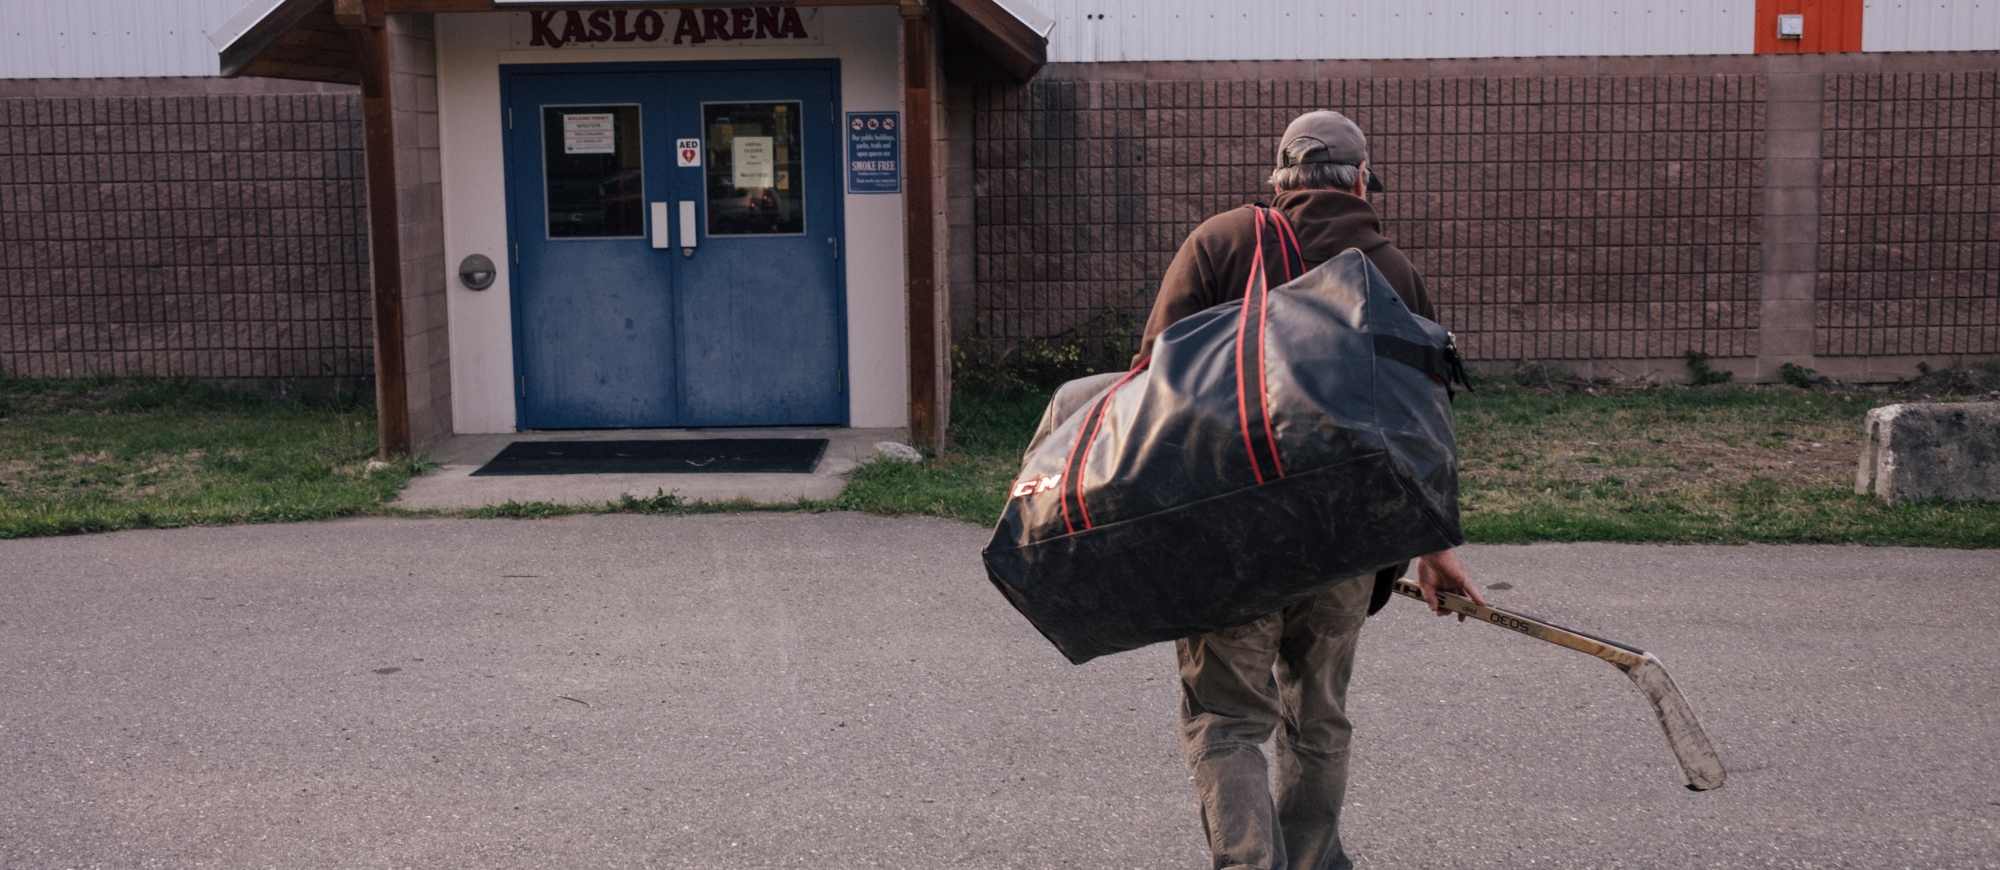 Man walking into Kaslo Arena holding a hockey stick and duffle bag